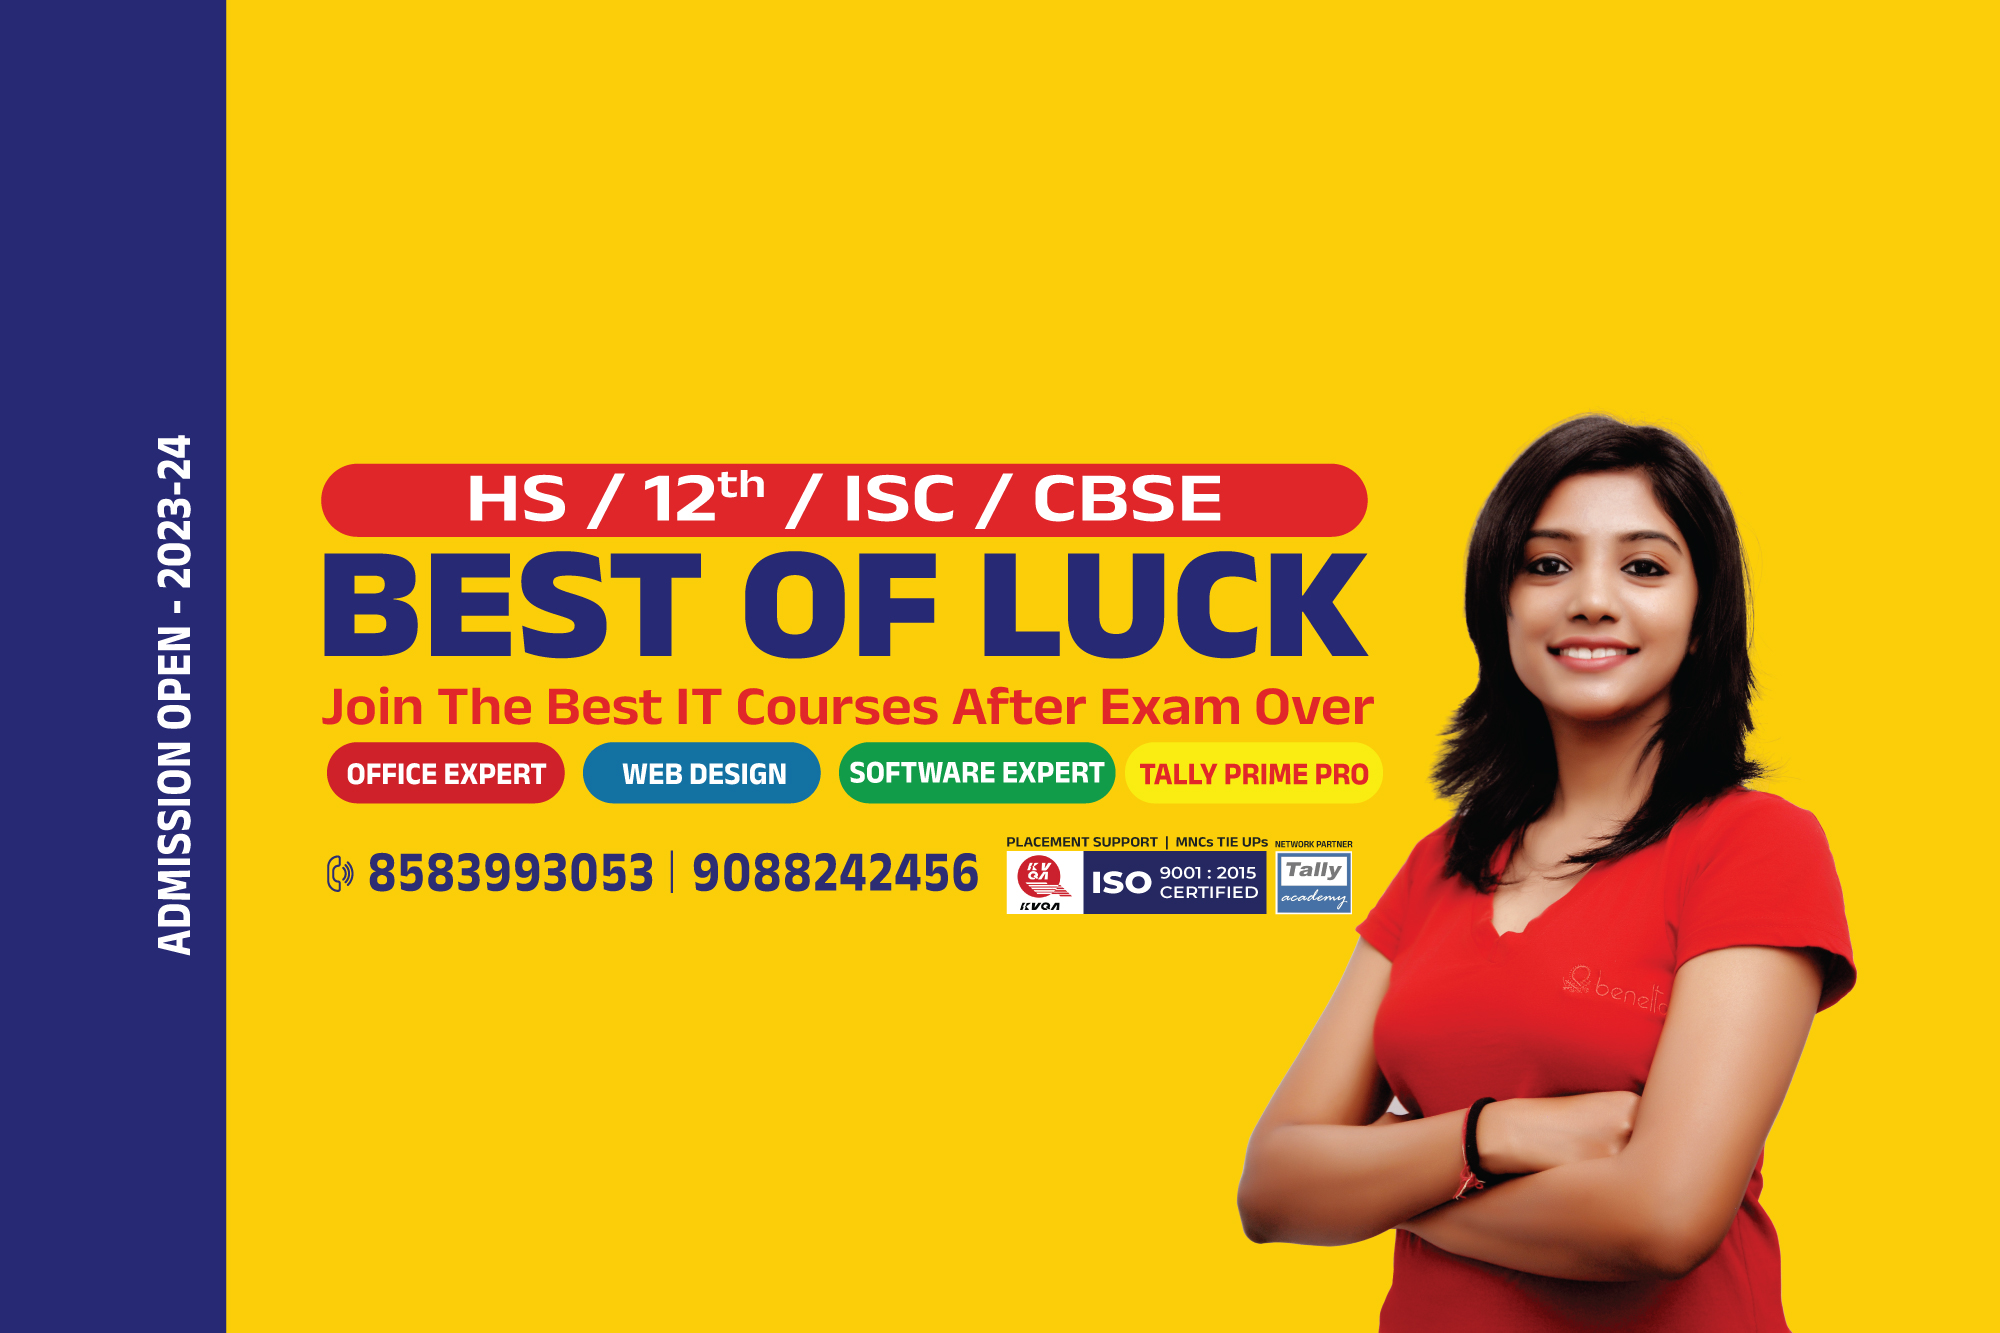 Best of Luck for HS, ISC, CBSE students